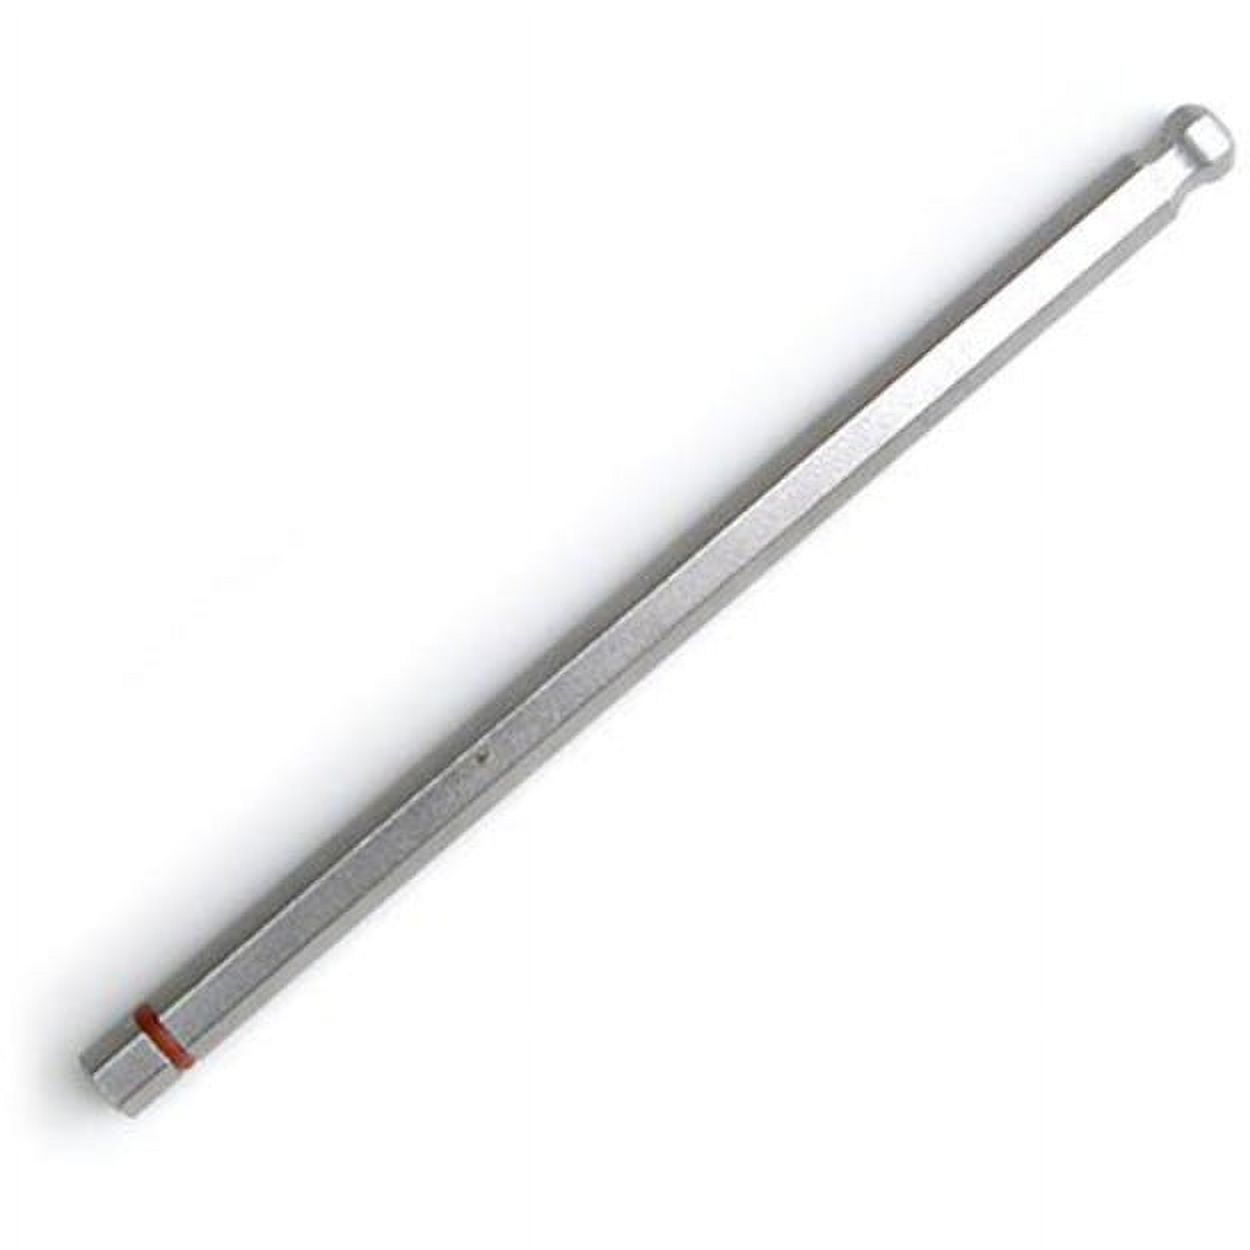 Losi Spin-Start Hex Drive Rod LST/2 XXL/2 LOSB5104 Gas Car/Truck Replacement Parts - image 2 of 3